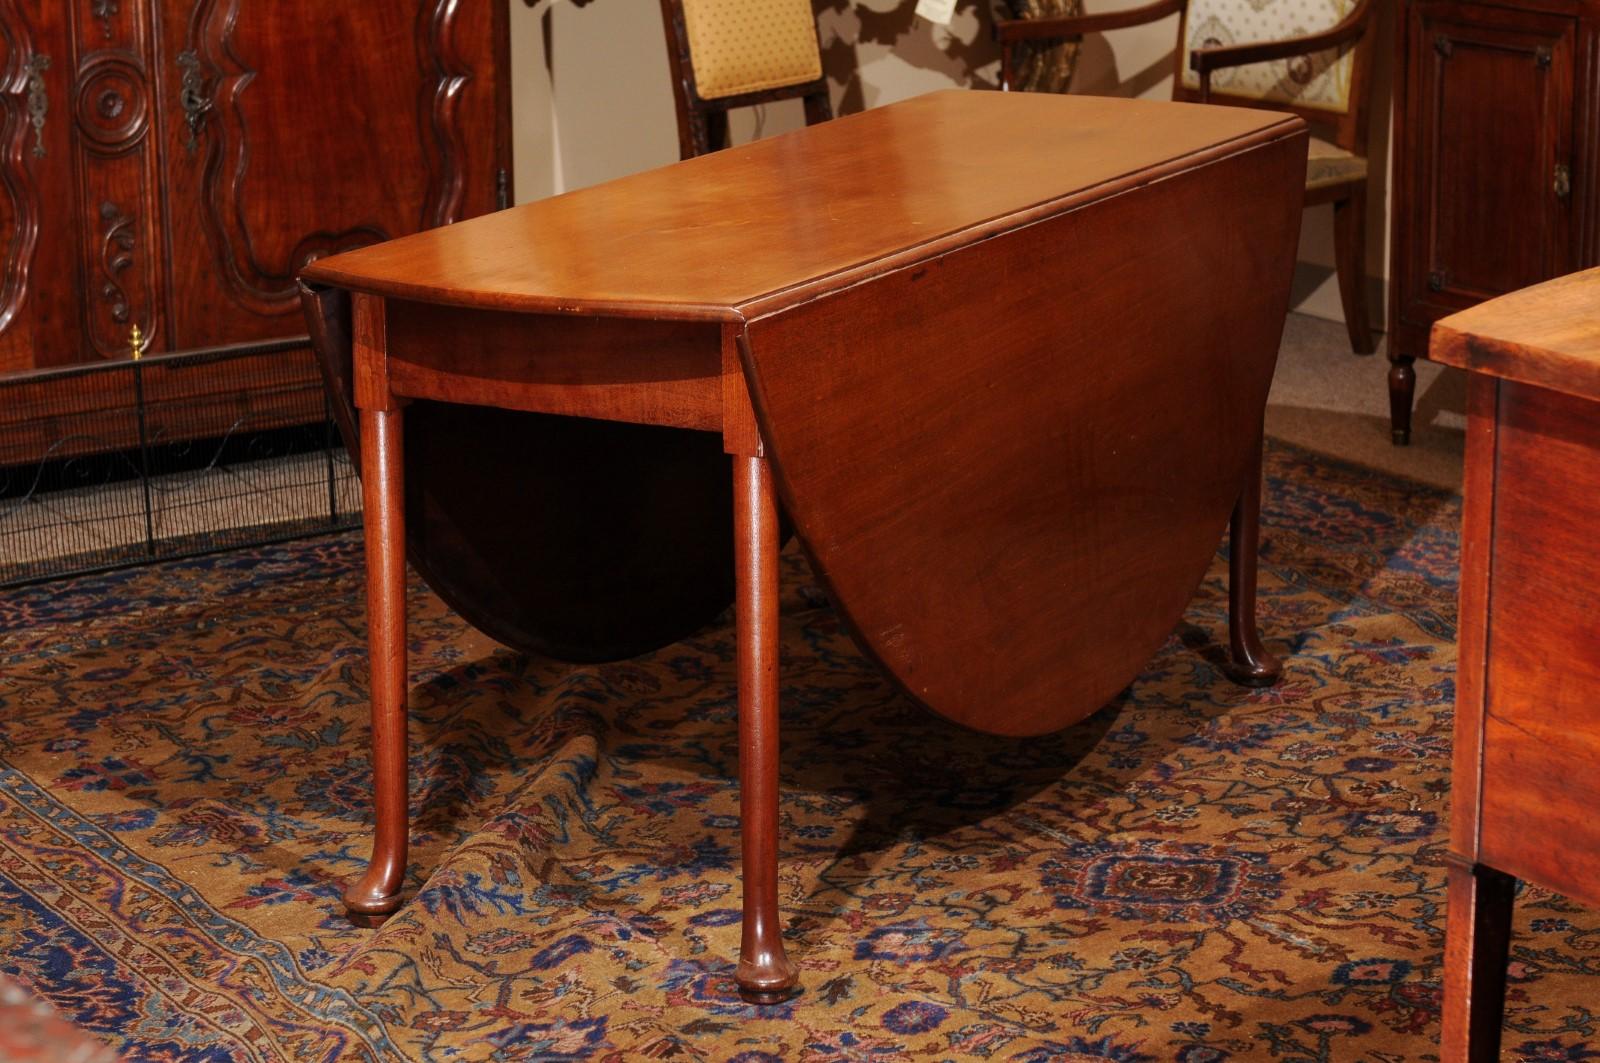  Mid-18th C English George II Mahogany Drop Leaf Oval Dining Table with Pad Feet For Sale 3